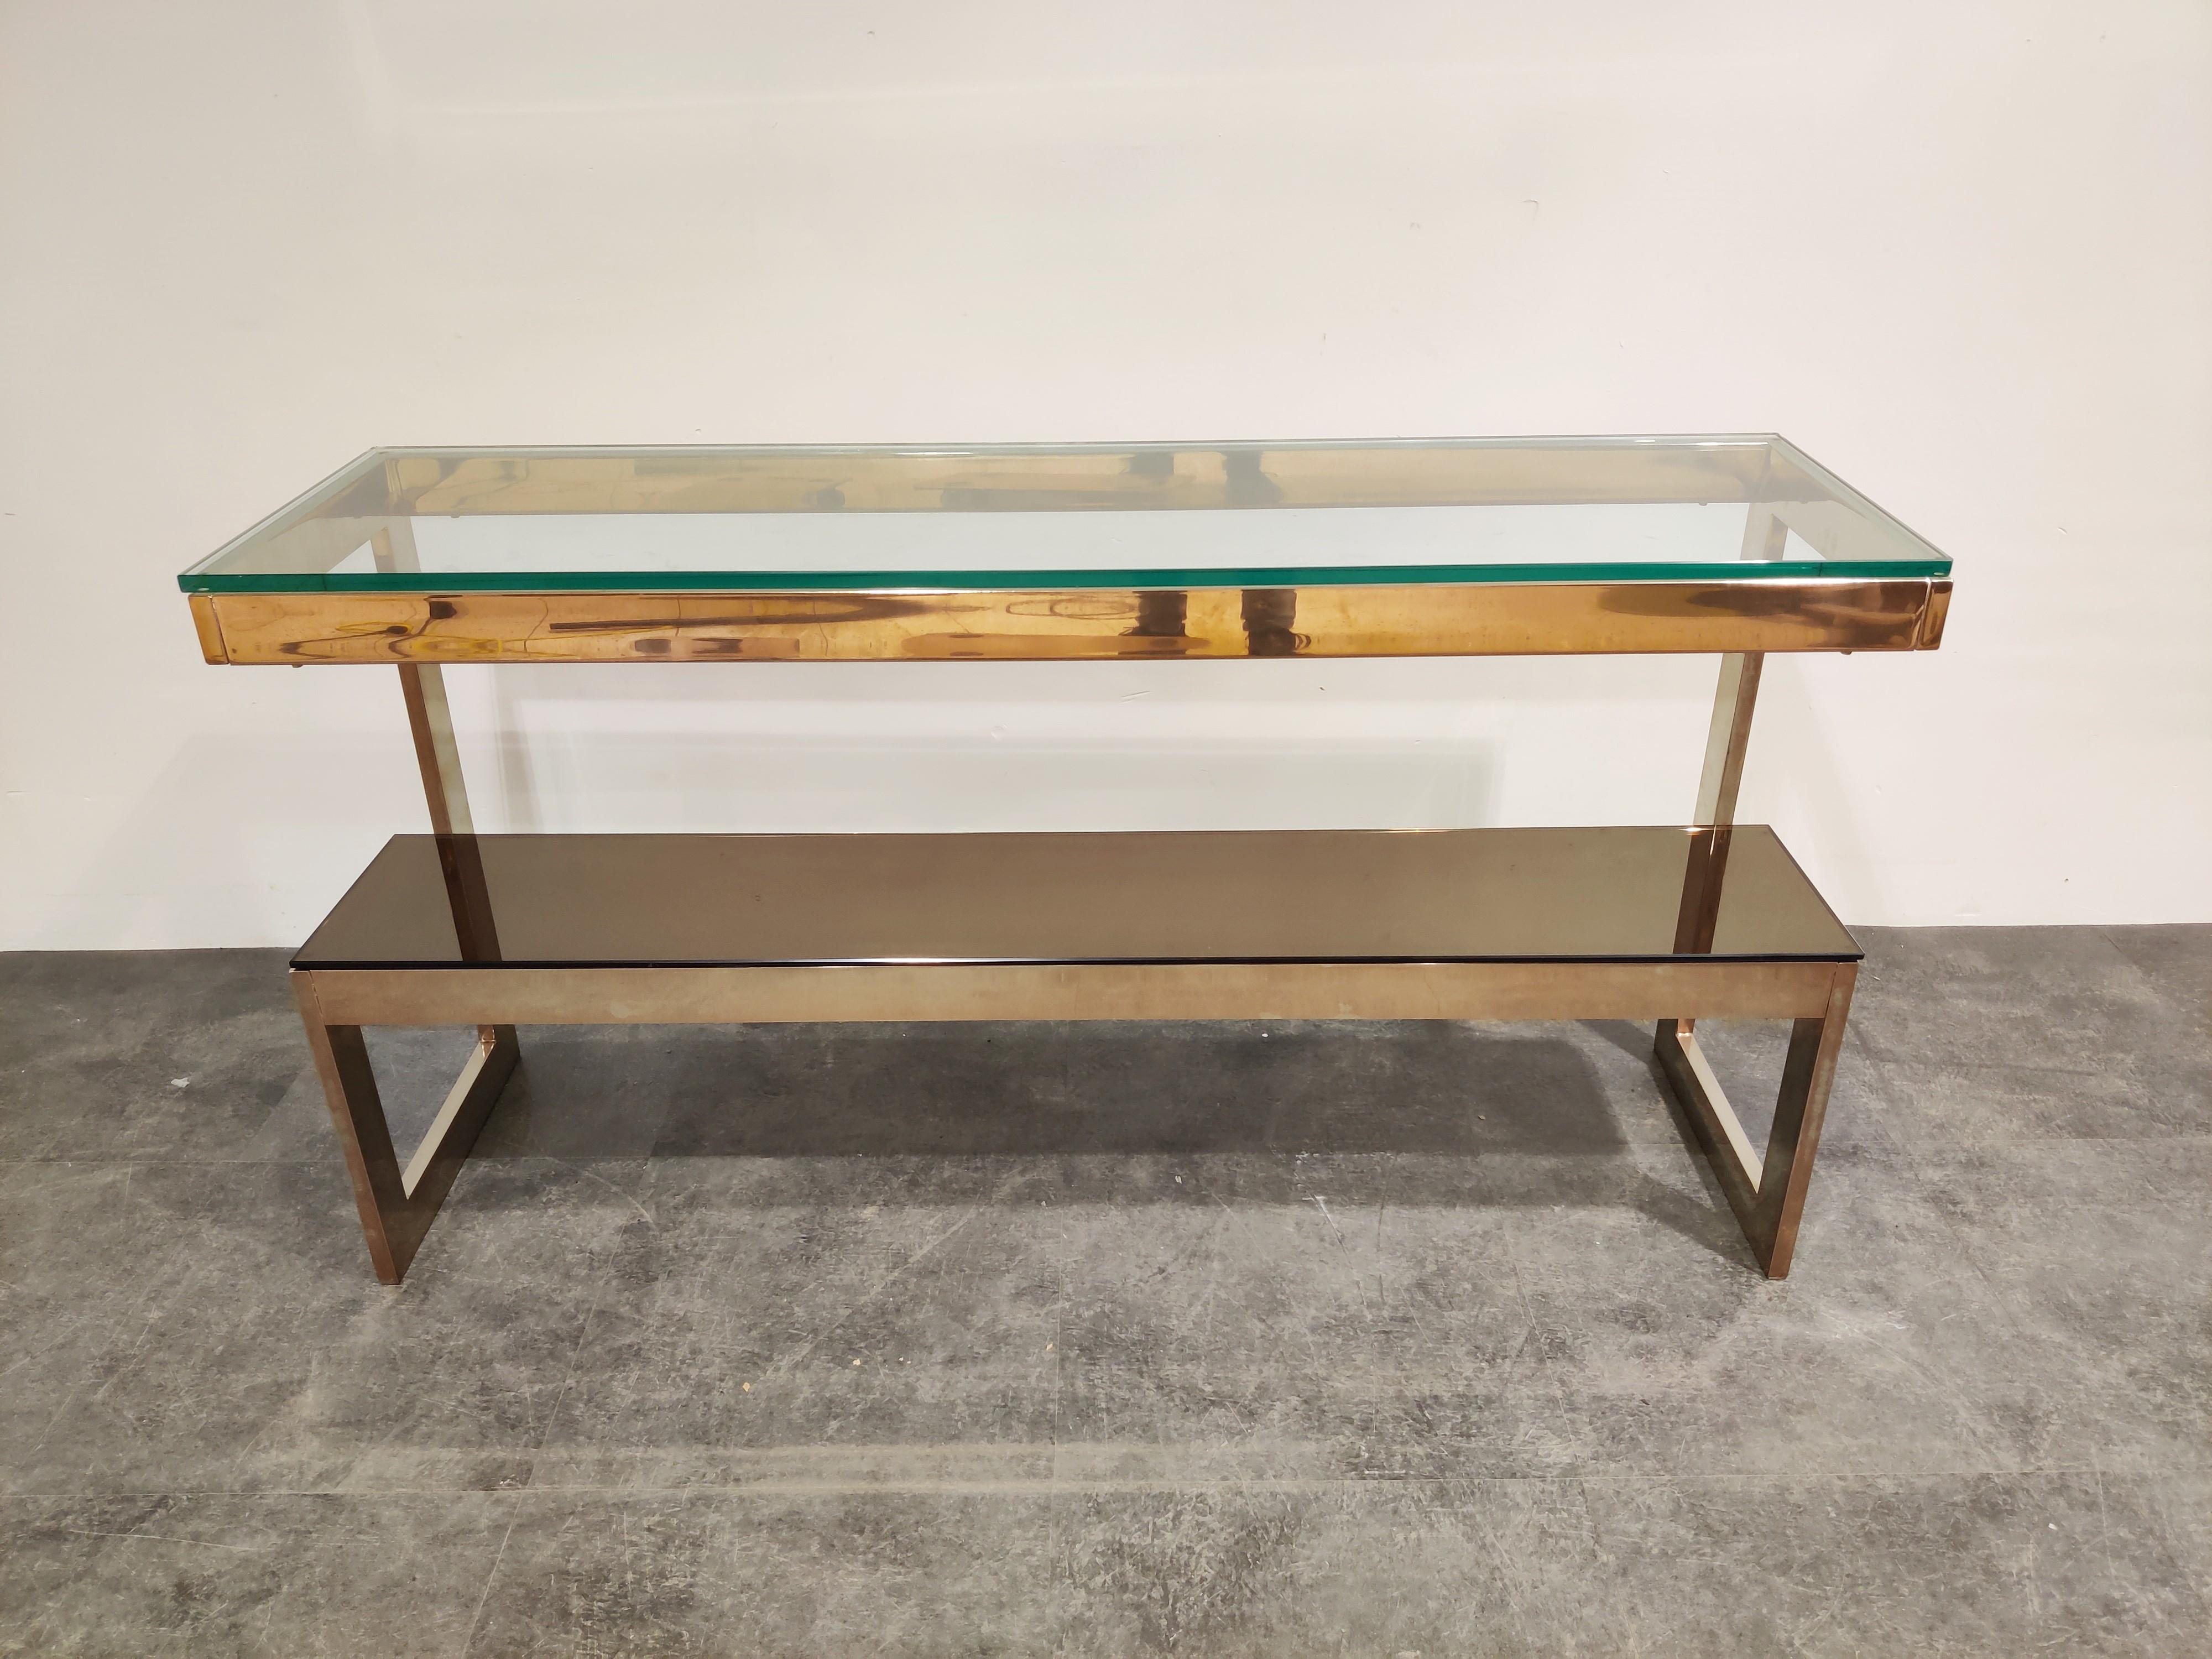 23-karat gold layered 'G'-shaped console table produced by Belgochrom.

The table has smoked glass and clear glass tops

Good condition,

1970s, Belgium

Measures: Height 74cm/29.13